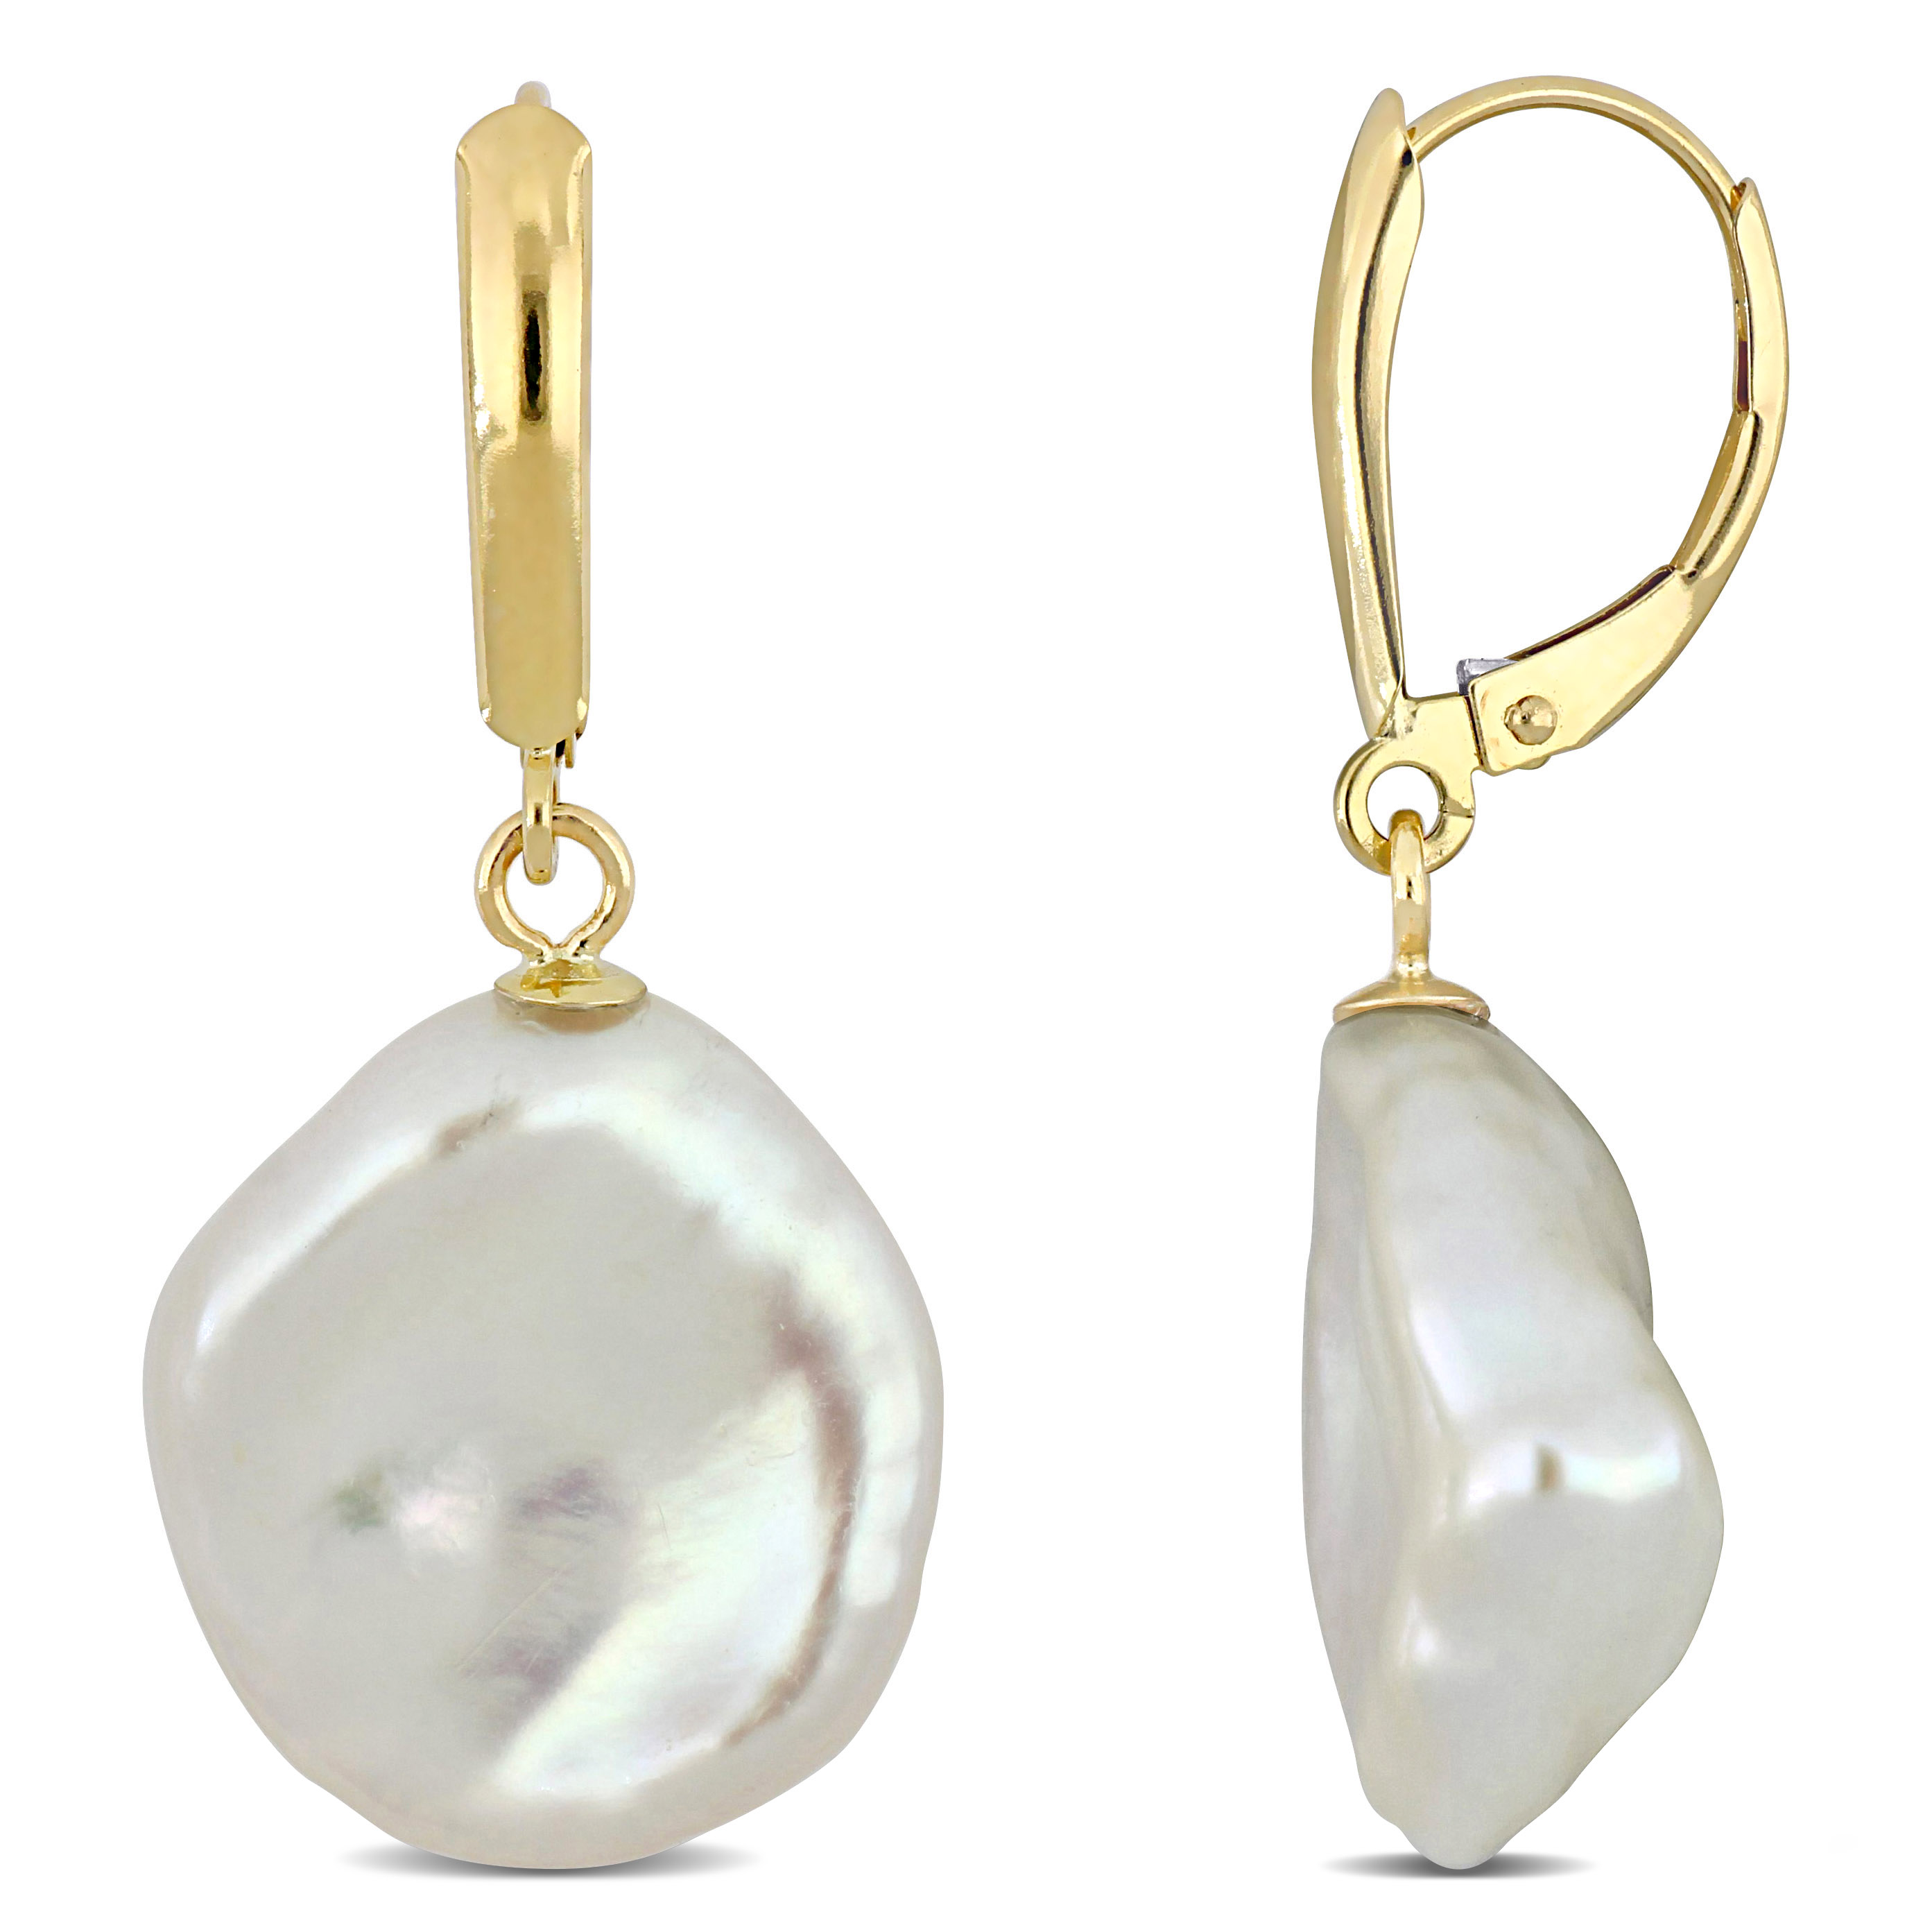 16 MM Freshwater Cultured Coin Pearl Leverback Earrings in 14k Yellow Gold